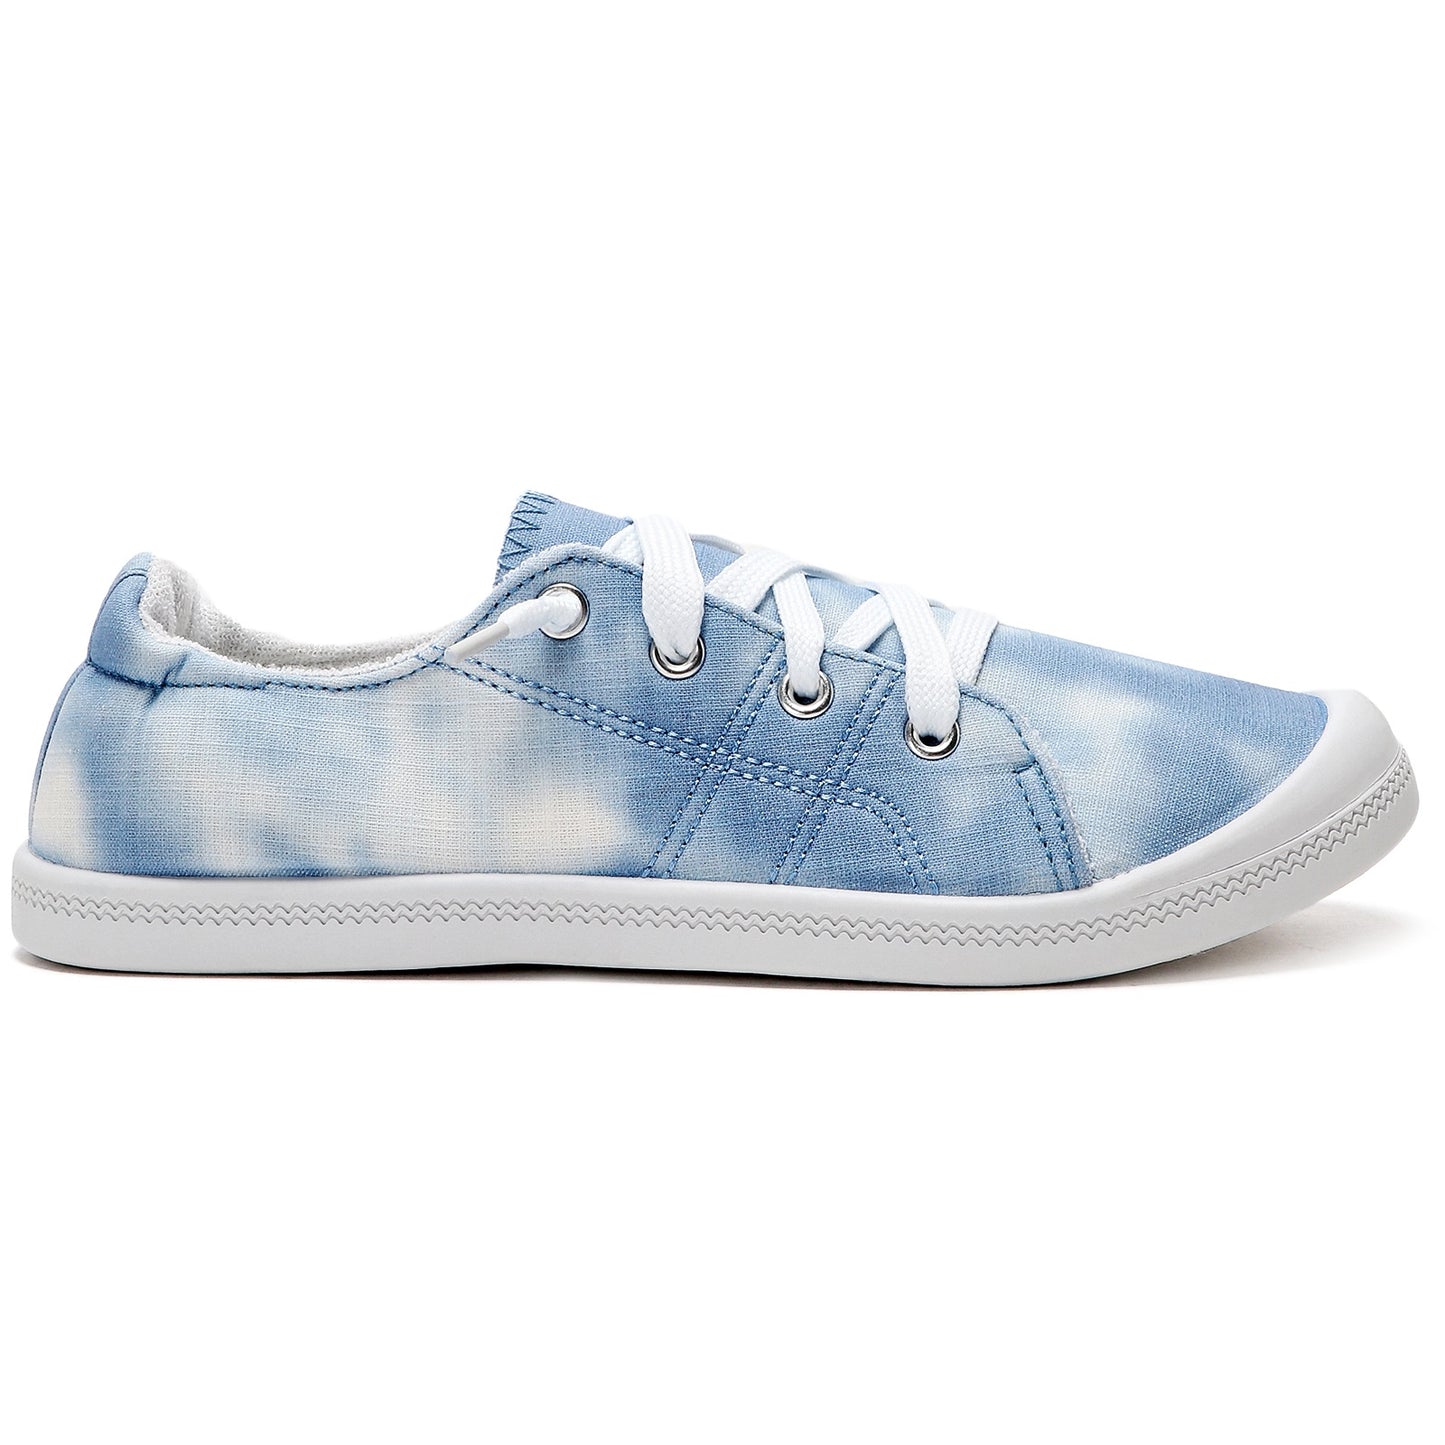 SOBEYO Women's Sneakers Canvas Lace-Up Low Top Padded Shoes